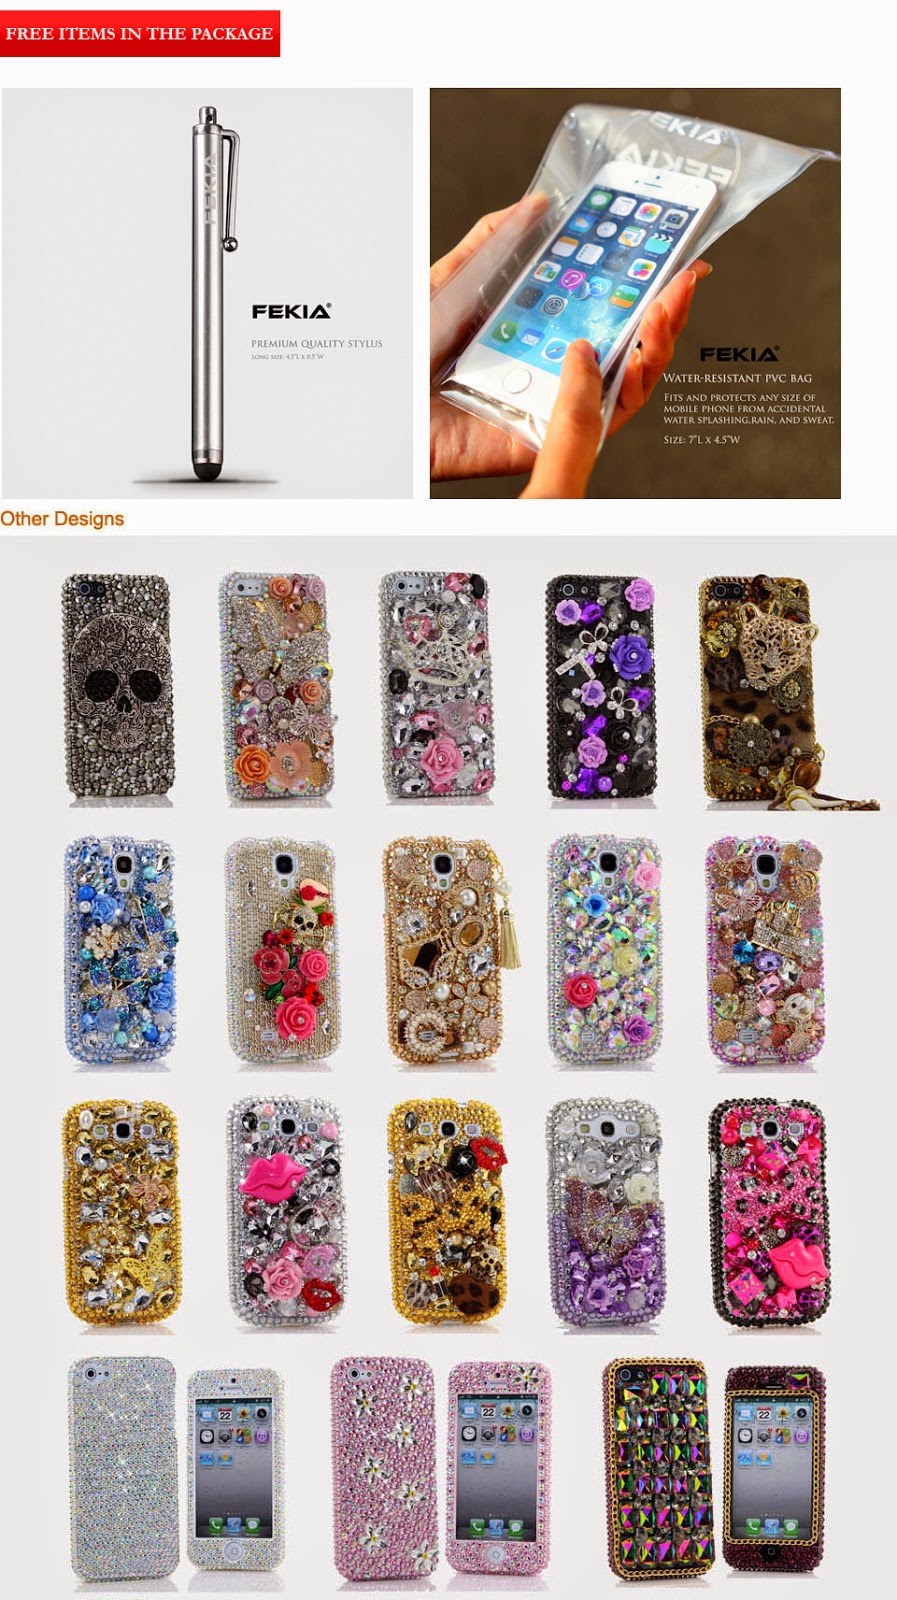 Samsung Galaxy Note 3 Note III N9000 3D Luxury Bling Case Cover Faceplate Swarovski Crystals